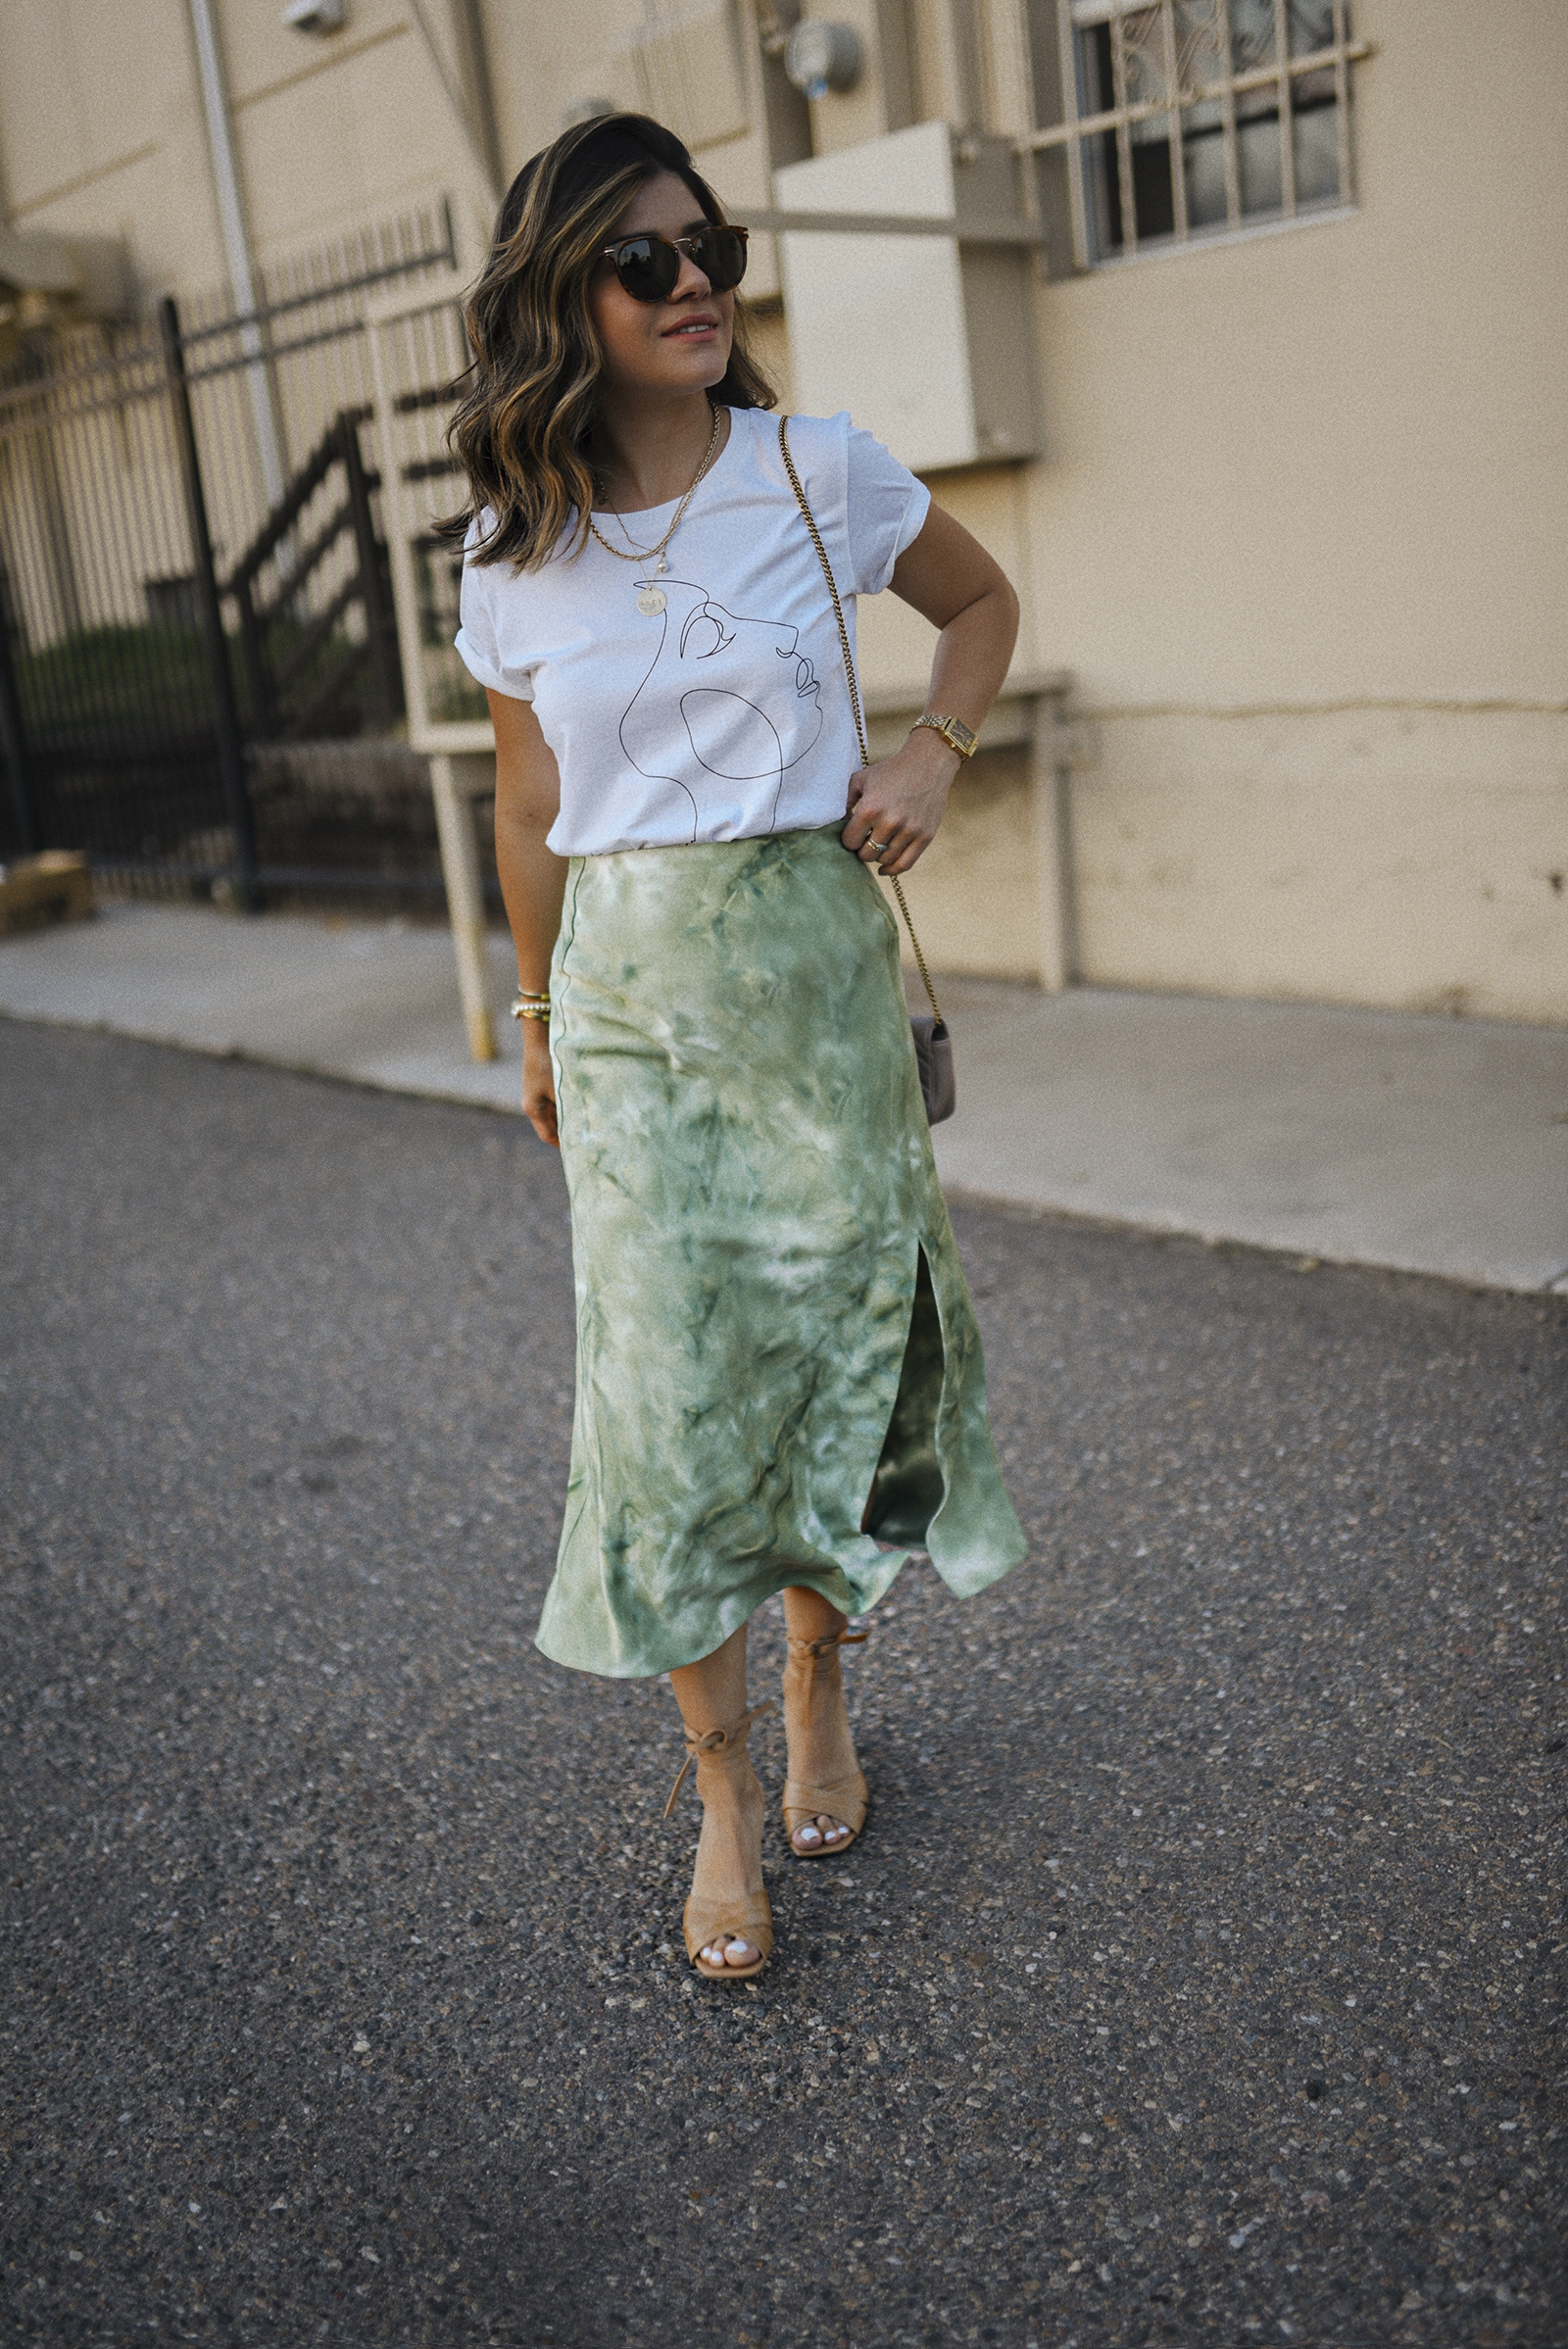 Carolina Hellal of Chic Talk wearing a Lucy Paris graphic tee, tie dye midi skirt, marc fisher sandals and Raen sunglasses. 